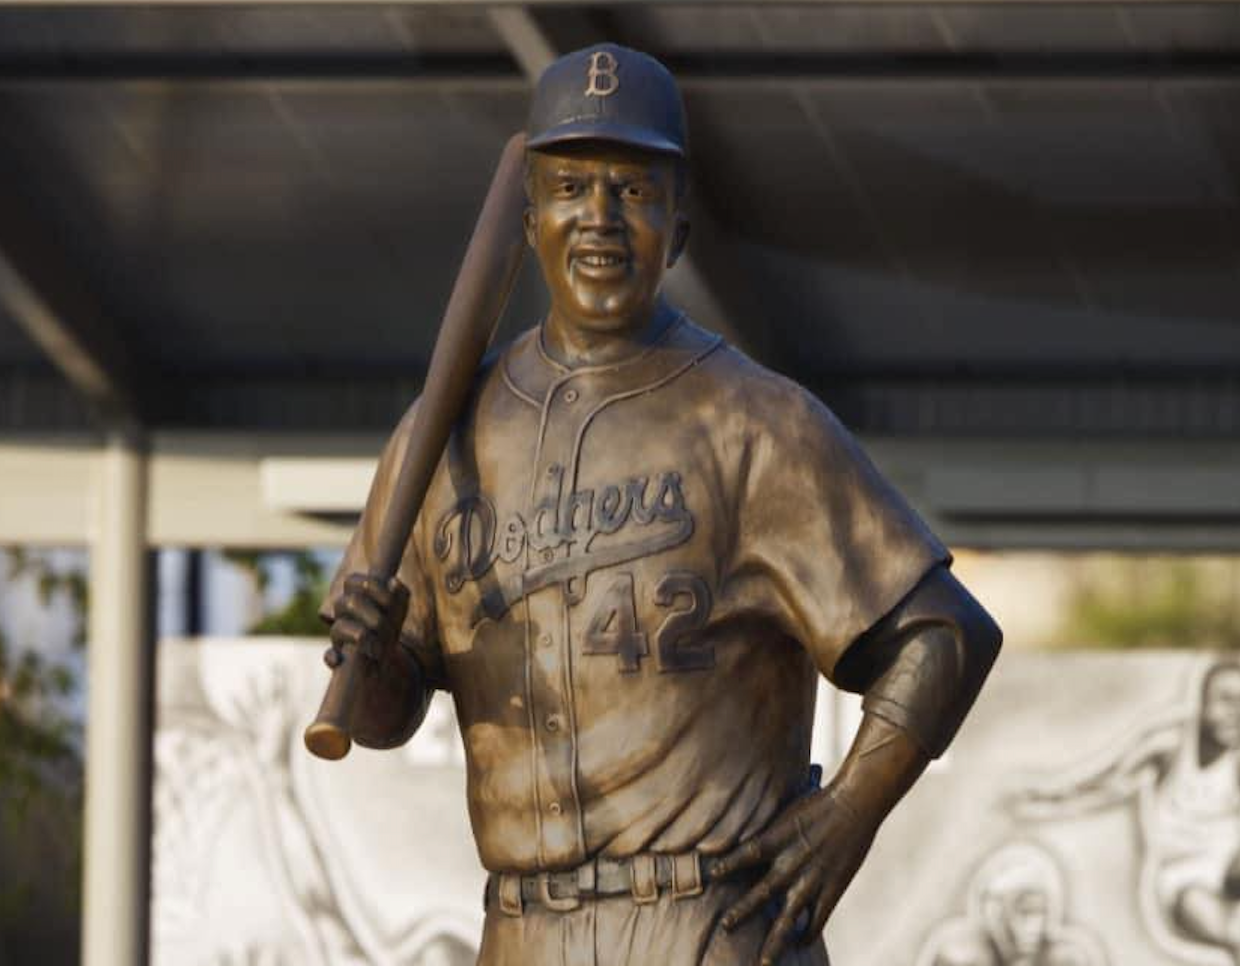 A statue of Jackie Robinson has been stolen from a park in Wichita, Kansas